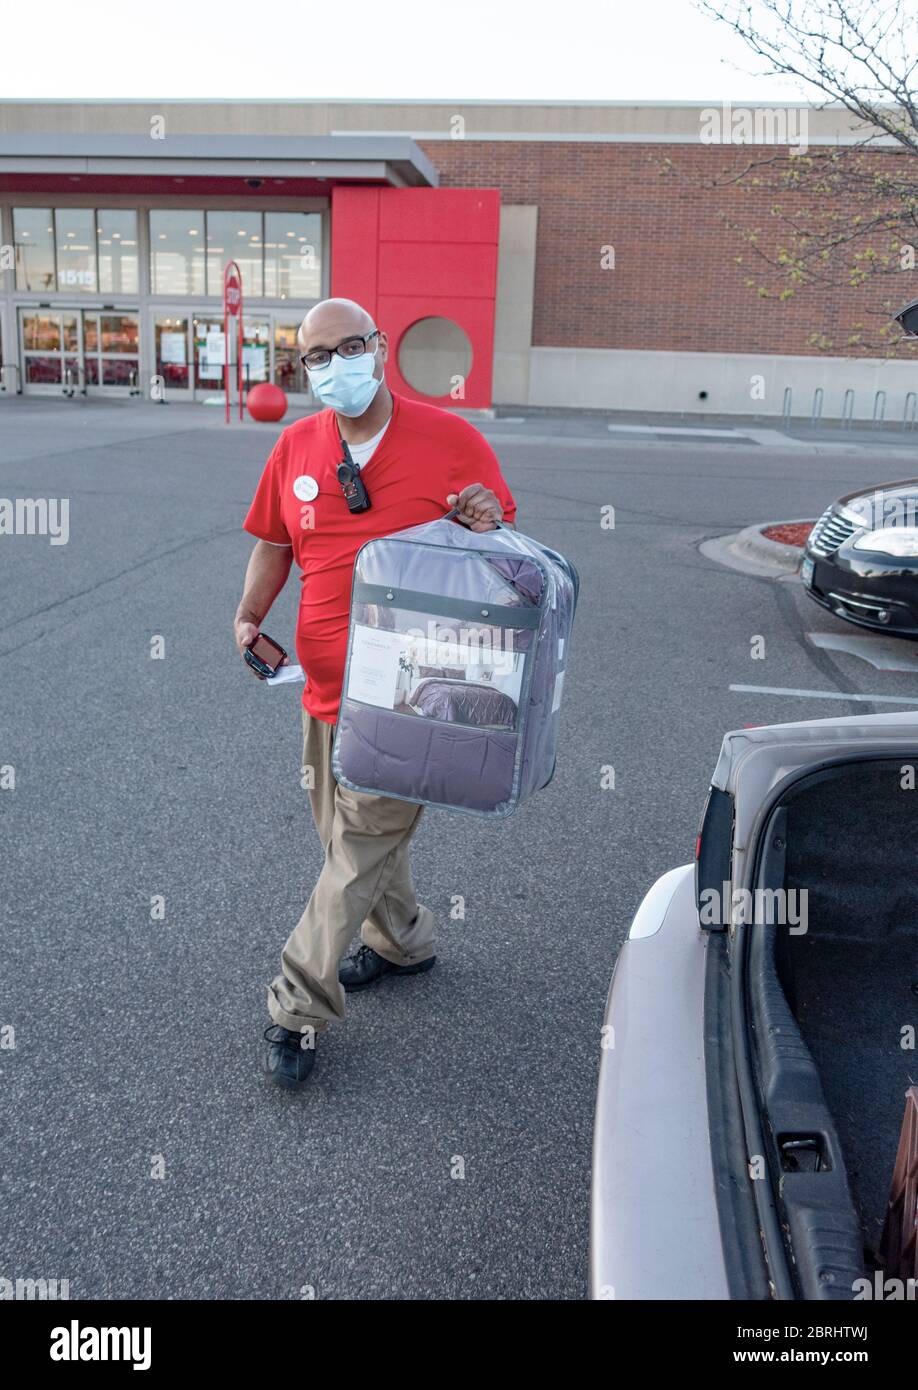 Masked Target worker delivering online purchase to the car in the pick-up area during the CORONA-19 pandemic. Roseville Minnesota MN USA Stock Photo